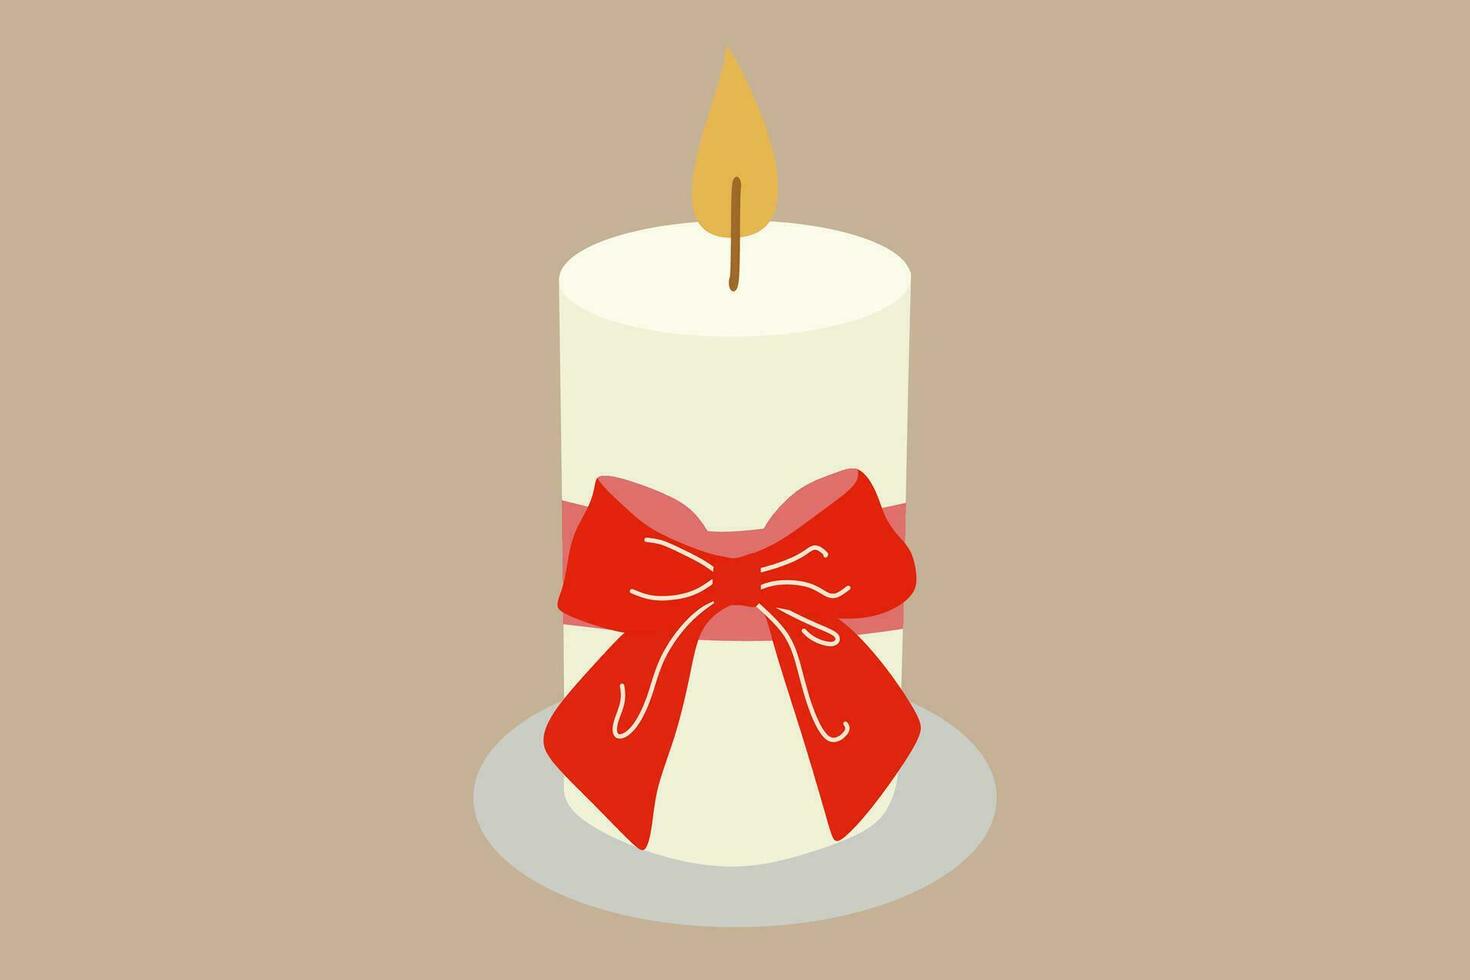 Christmas candle with Red Ribbon Bow. Xmas Vector illustration, Burning white Candle, Isolated Holiday object. Candlestick with flame, Warm and Cute Decoration, Birthday Card template, Design element